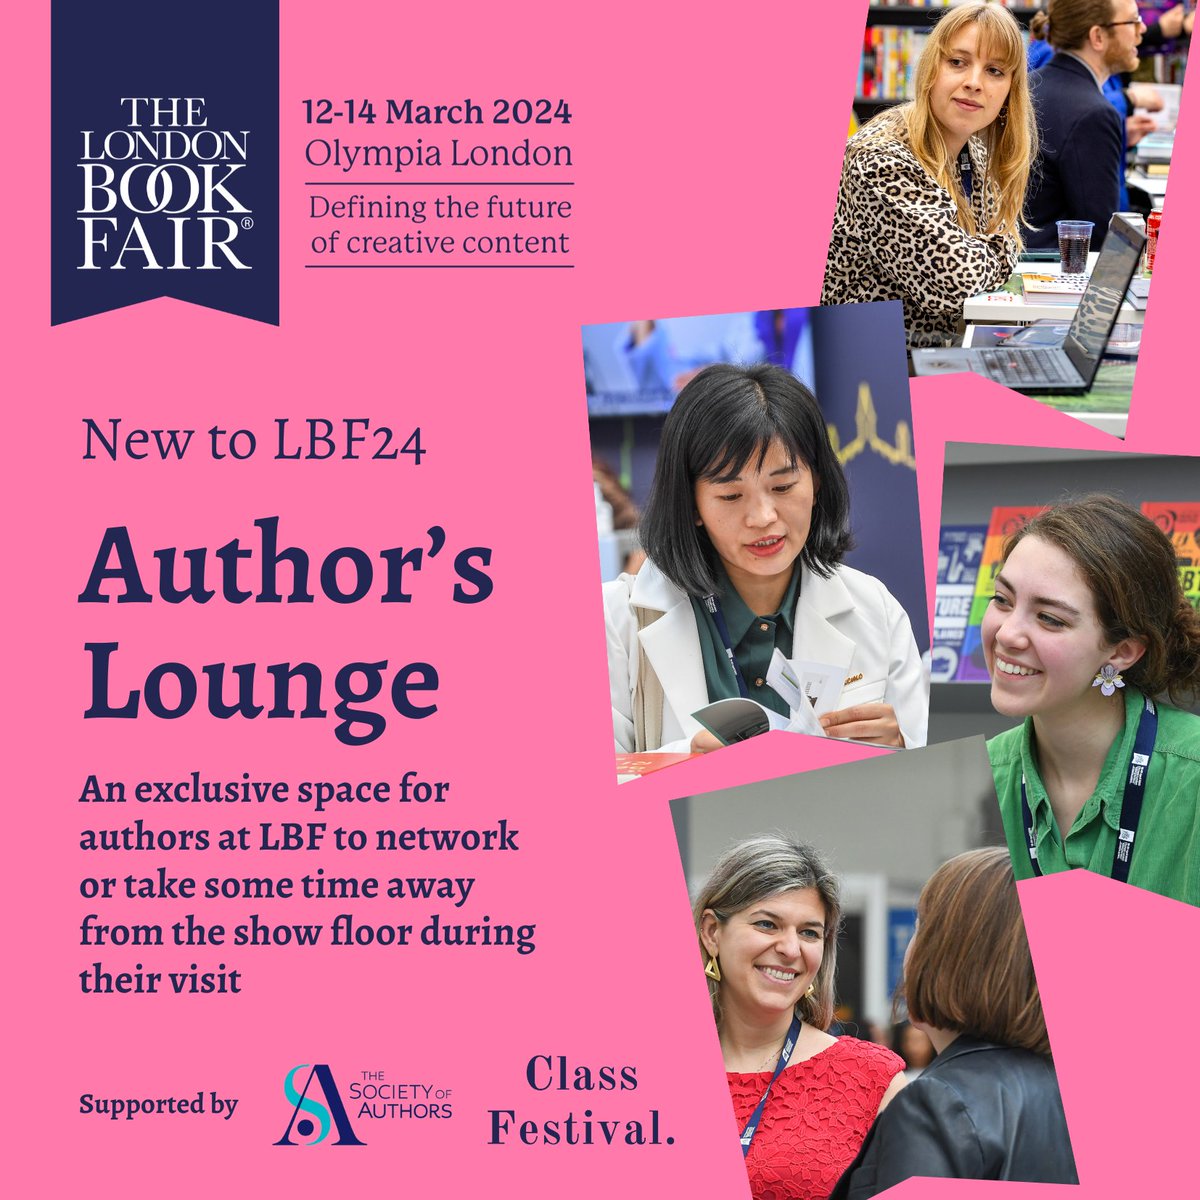 ANNOUNCING: The Author's Lounge at LBF The Author's Lounge is a space exclusively for authors, where they can network and take some time away from the show floor during their visit to #LBF24. Purchase discounted early bird tickets here! bit.ly/3QYW5TH